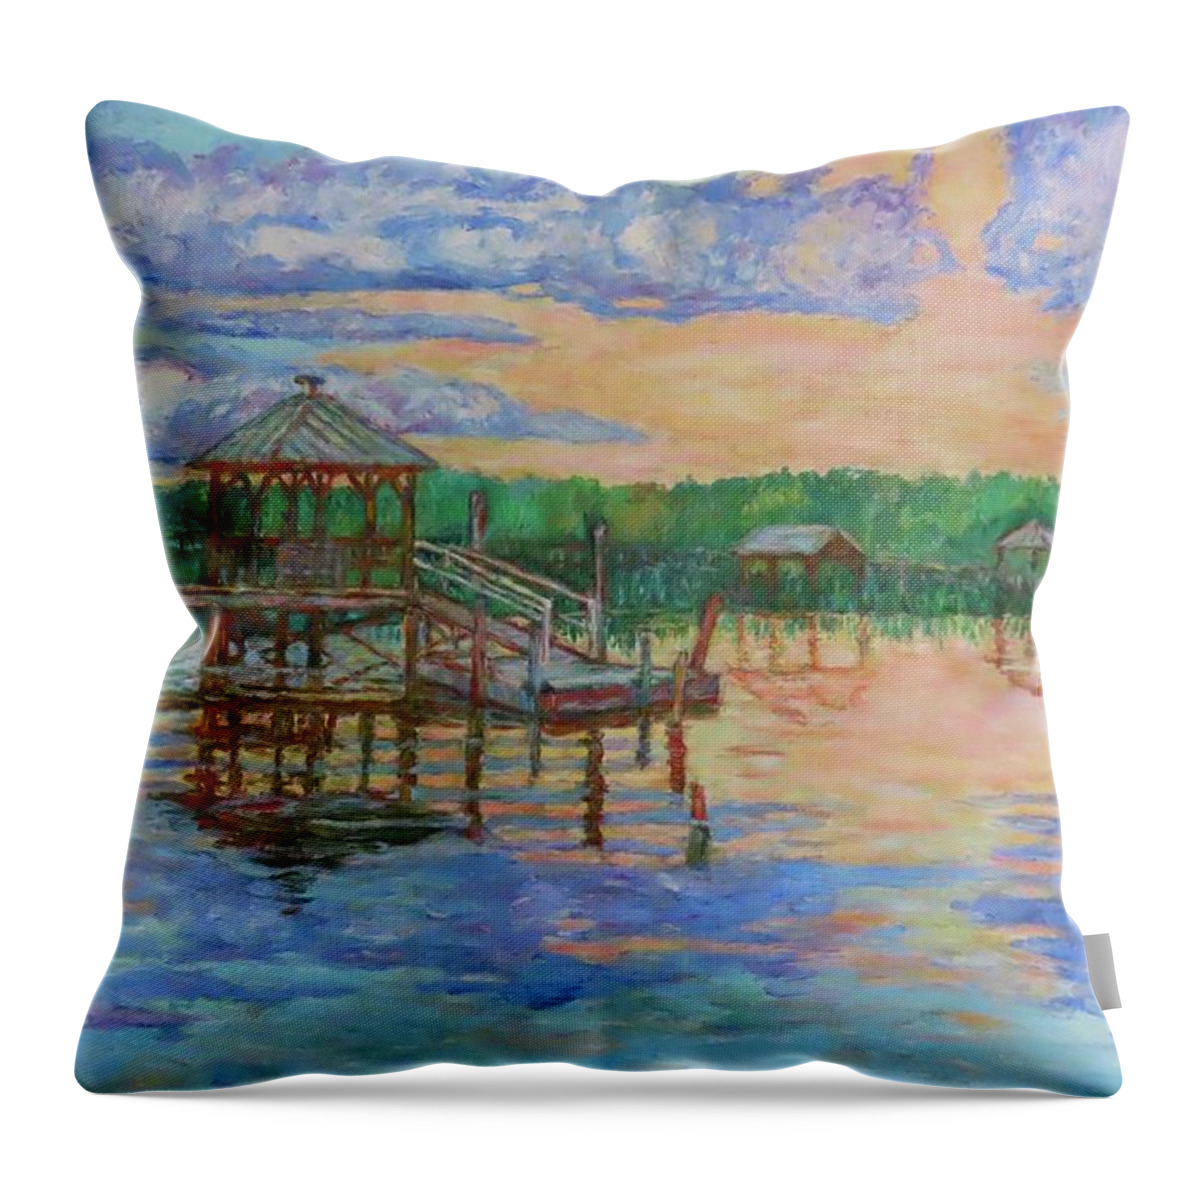 Landscape Throw Pillow featuring the painting Marsh View at Pawleys Island by Kendall Kessler